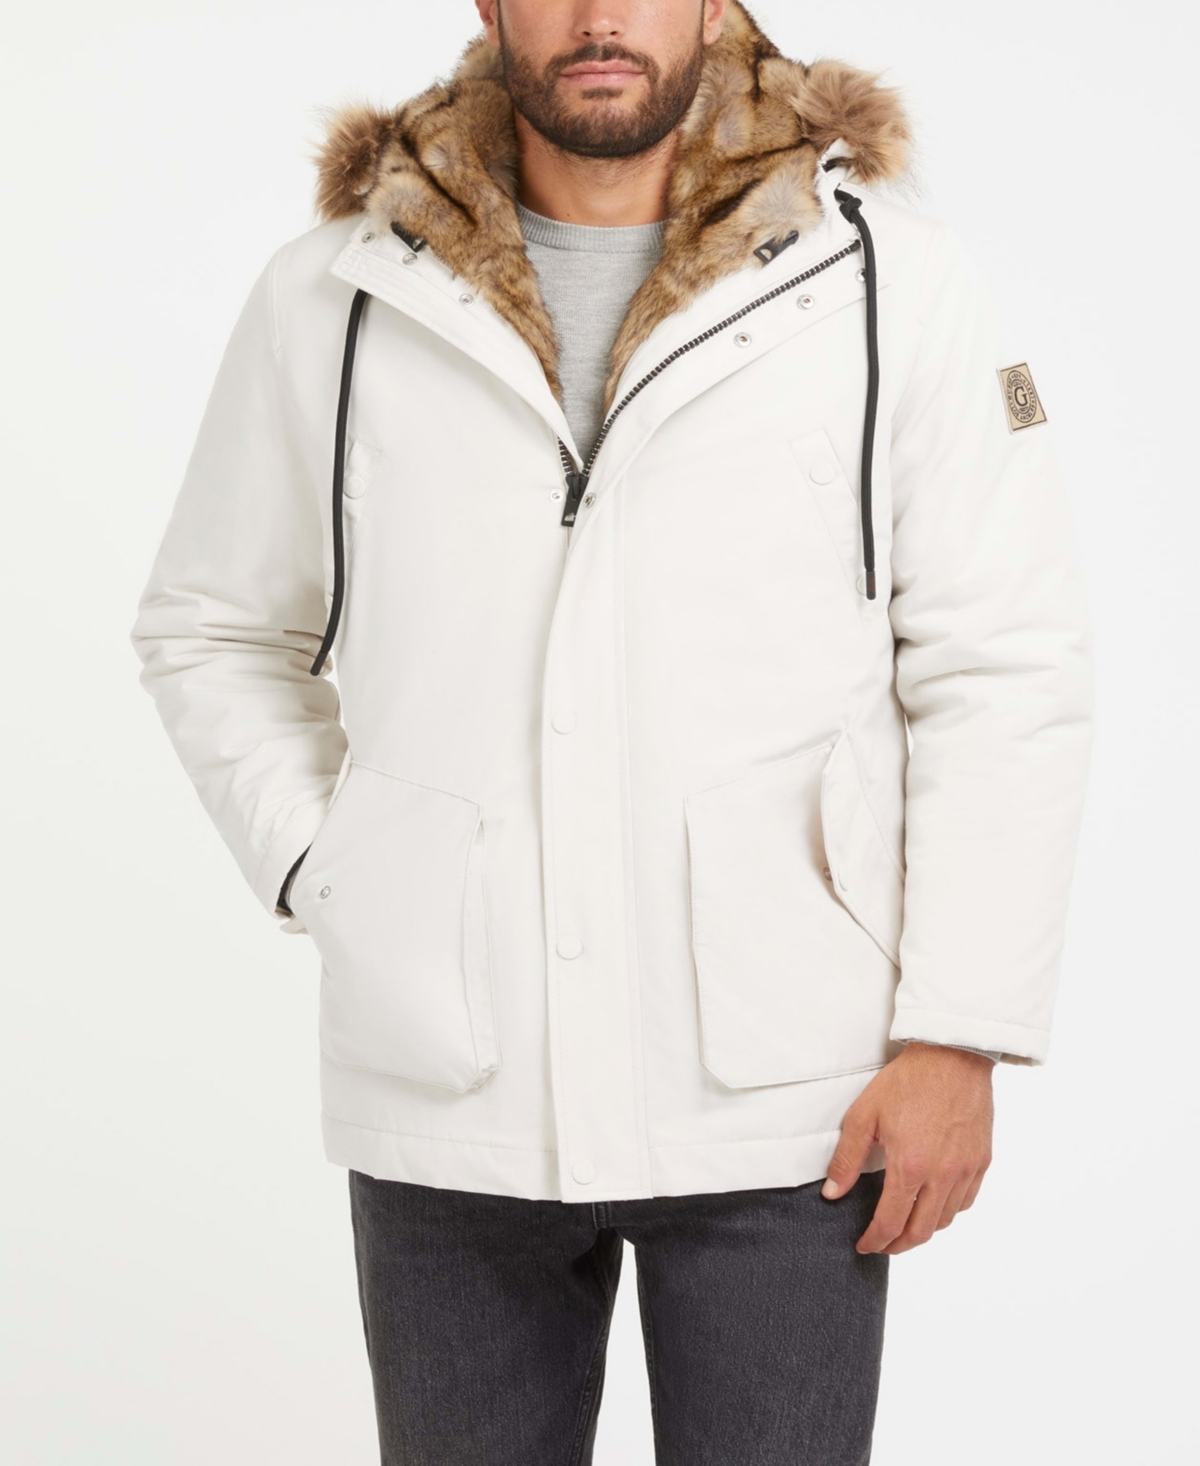 Guess Men's Winter Faux Fur Parka Jacket In Muted Stone